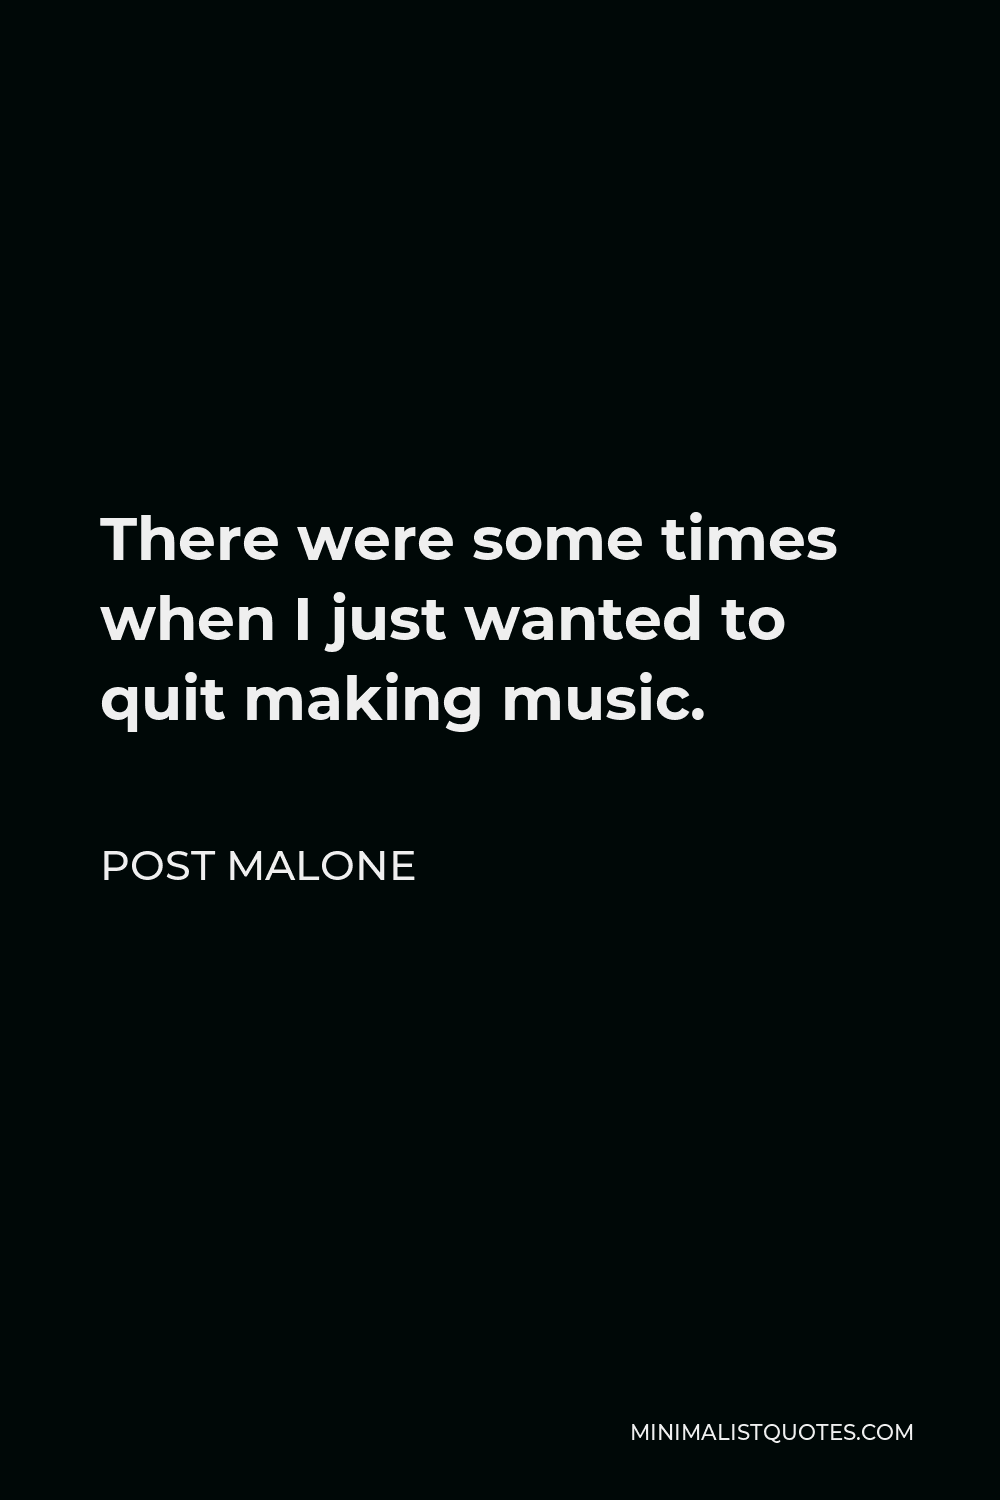 Post Malone Quote - There were some times when I just wanted to quit making music.